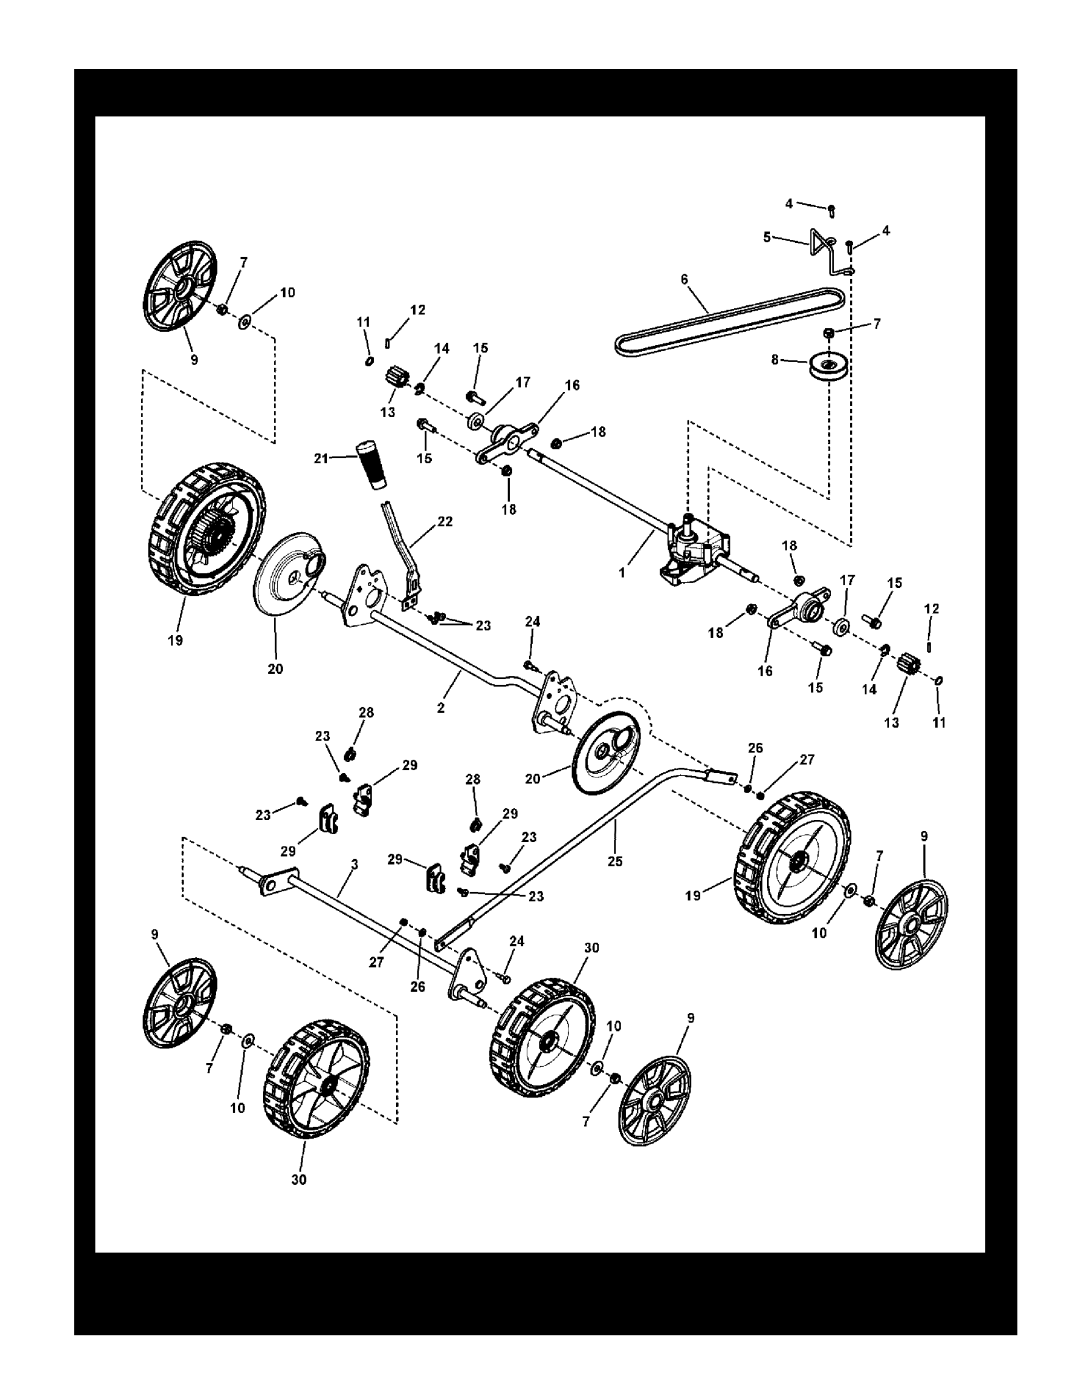 Briggs & Stratton 7800756, 7800708 manual Transmission & Wheels Group, Reproduction, Manual No, 7104293, VARIABLE SPEED 3N1 